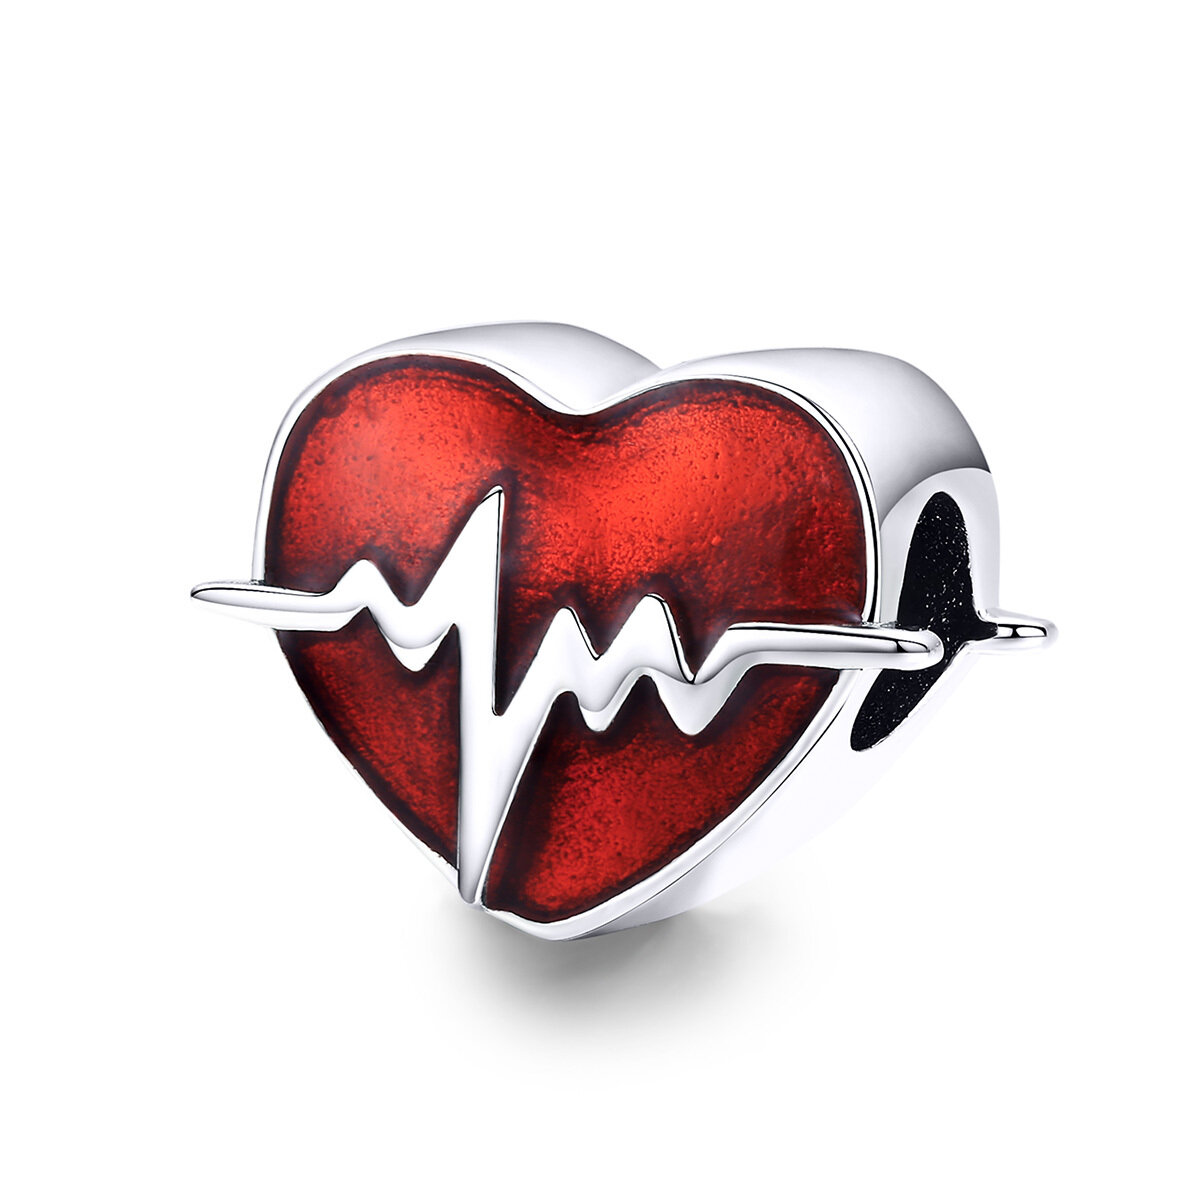 GemKing SCC1151 Heartbeat time S925 Sterling Silver Charm